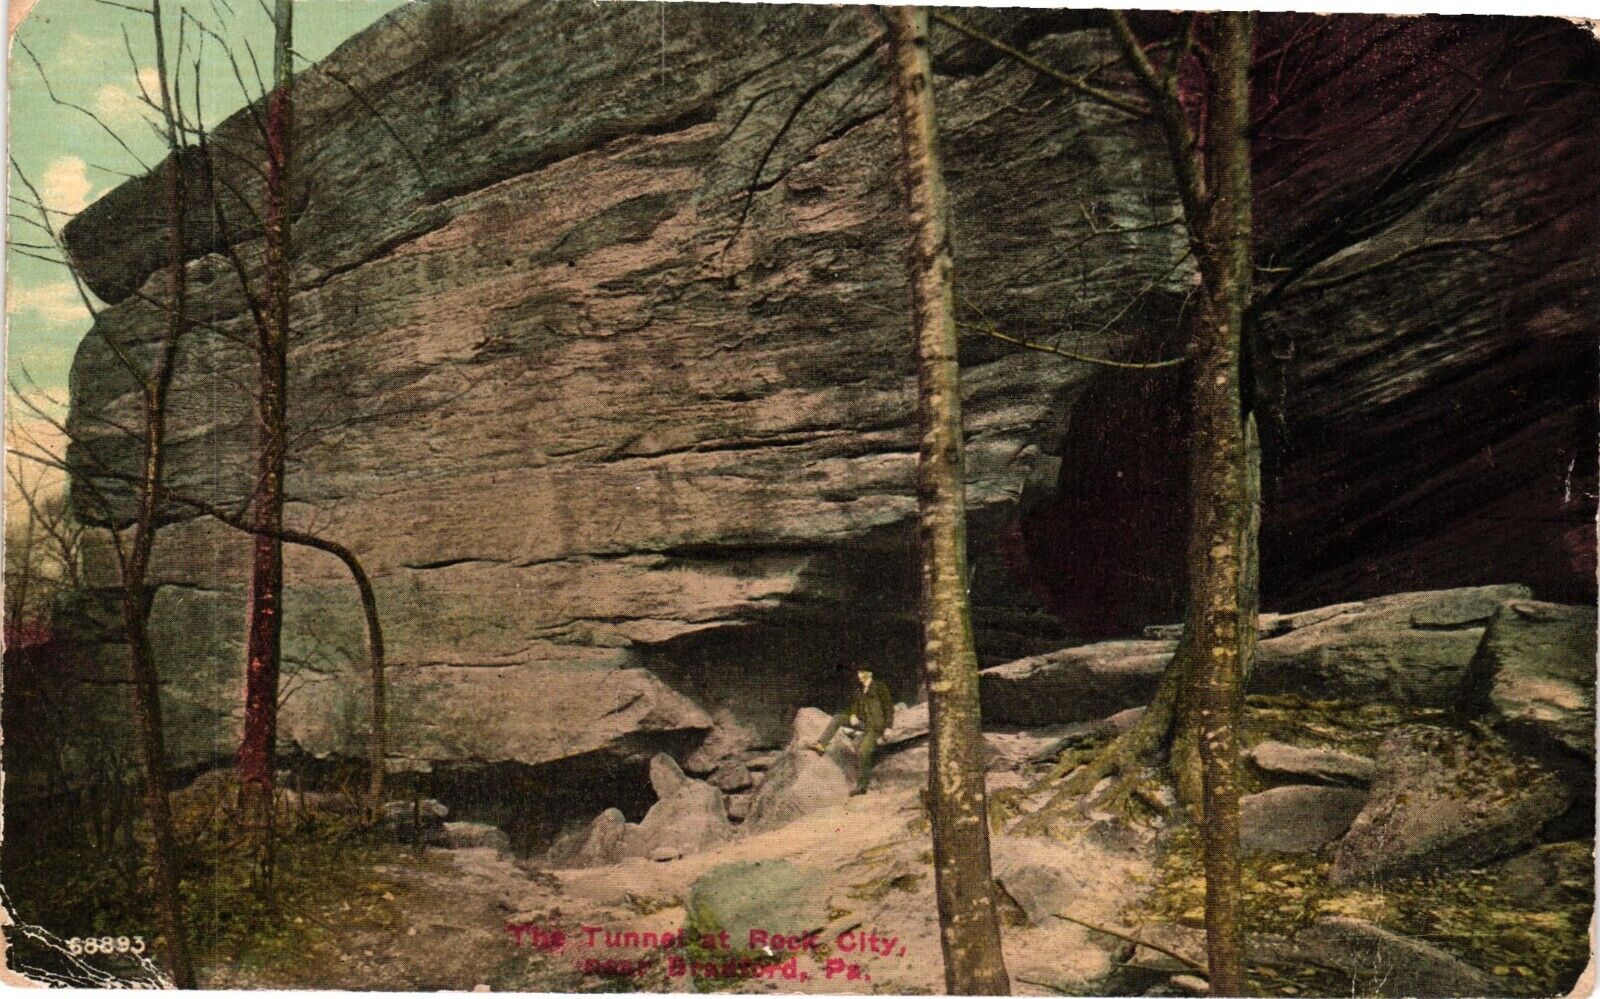 Nature Formed Natural Tunnel Through The Rock PA Postcard Unposted c1920